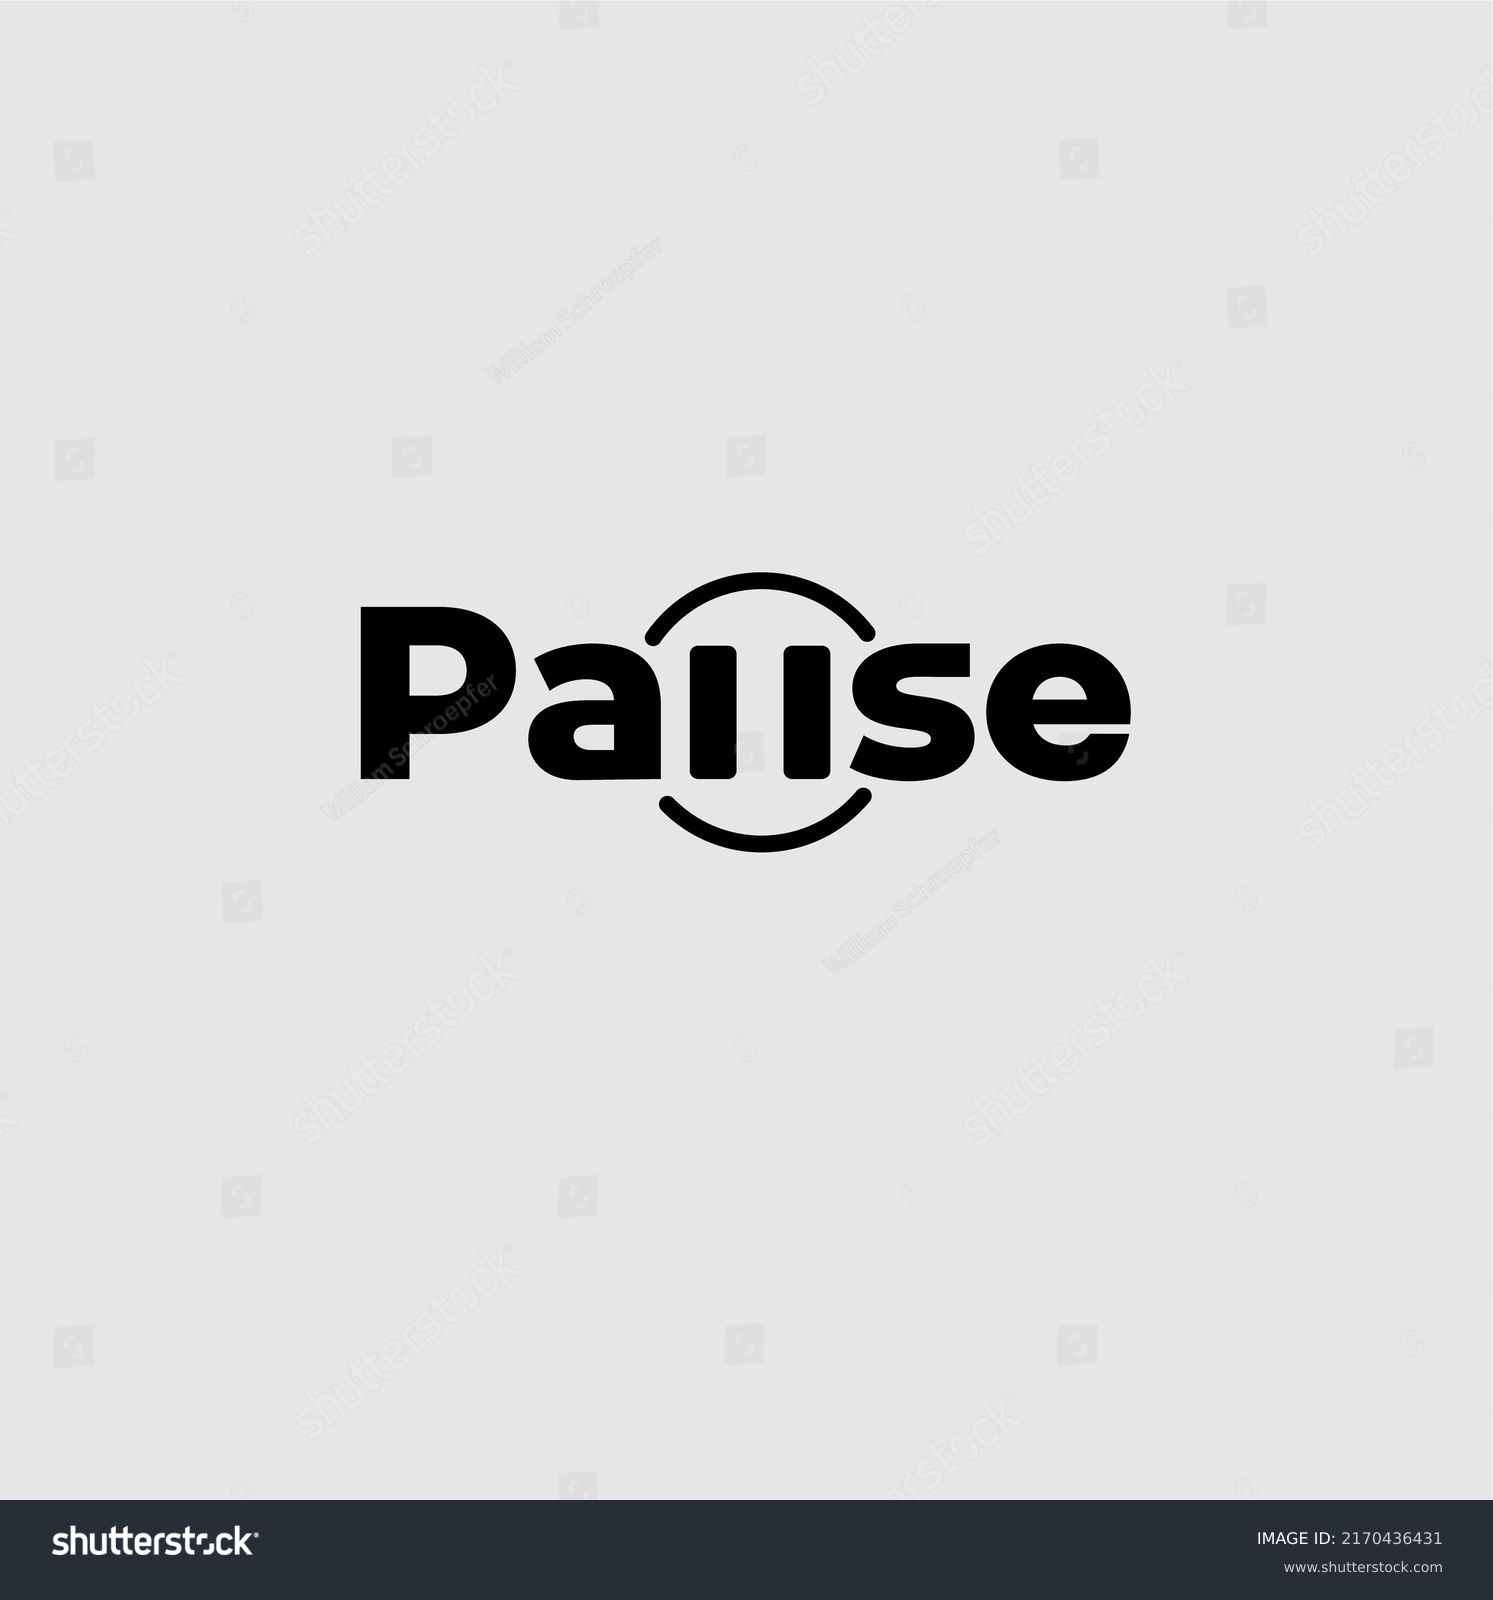 Pause logo with writing and vector icon #2170436431